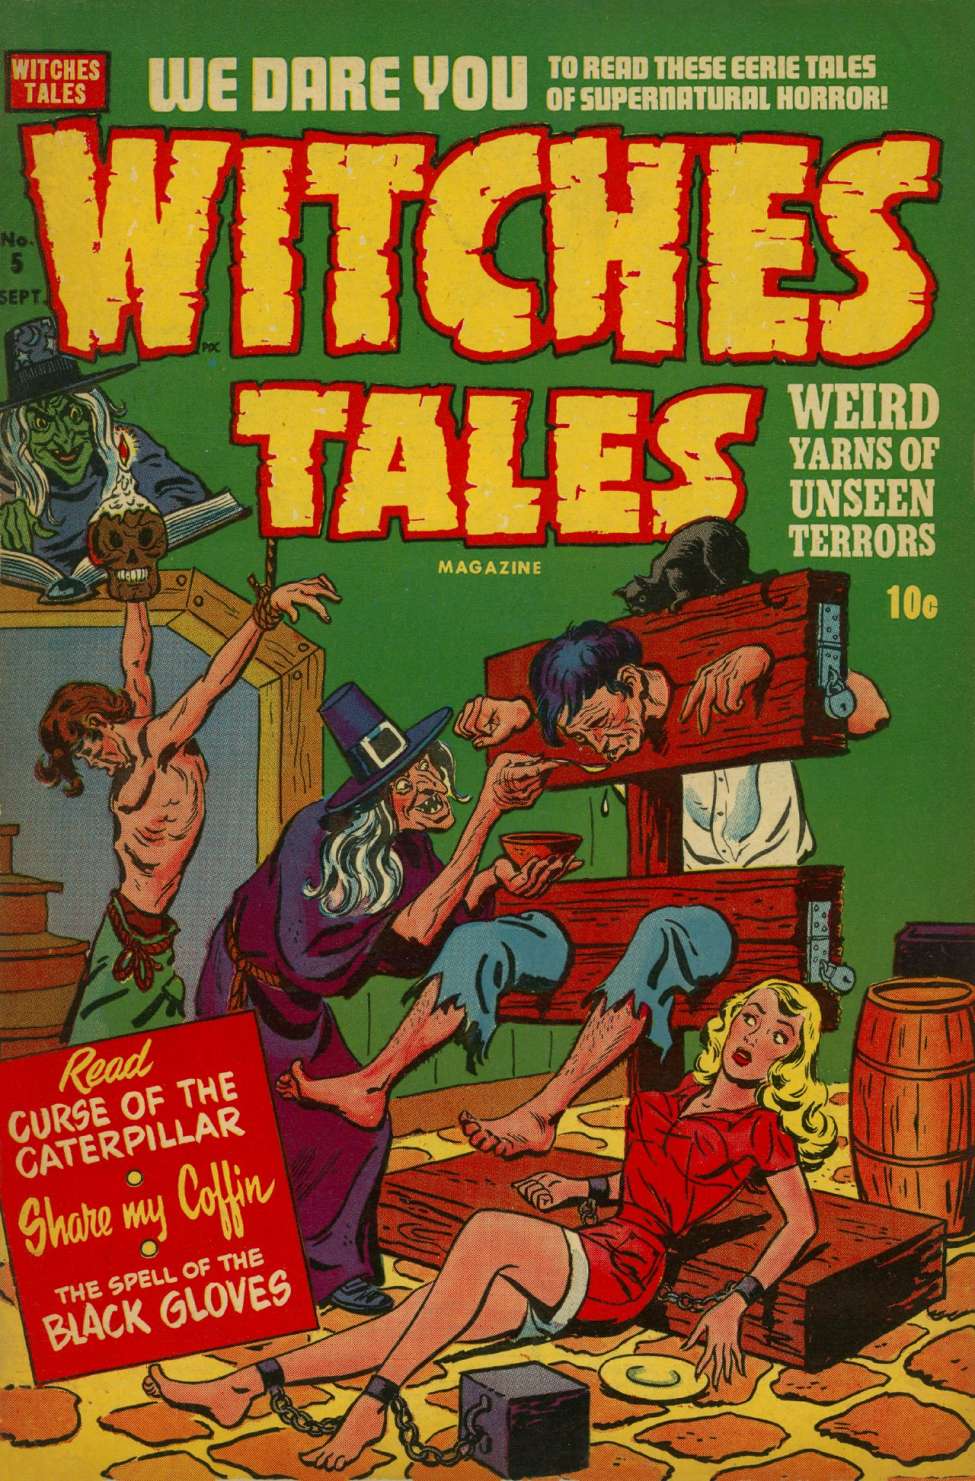 Book Cover For Witches Tales 5 - Version 1